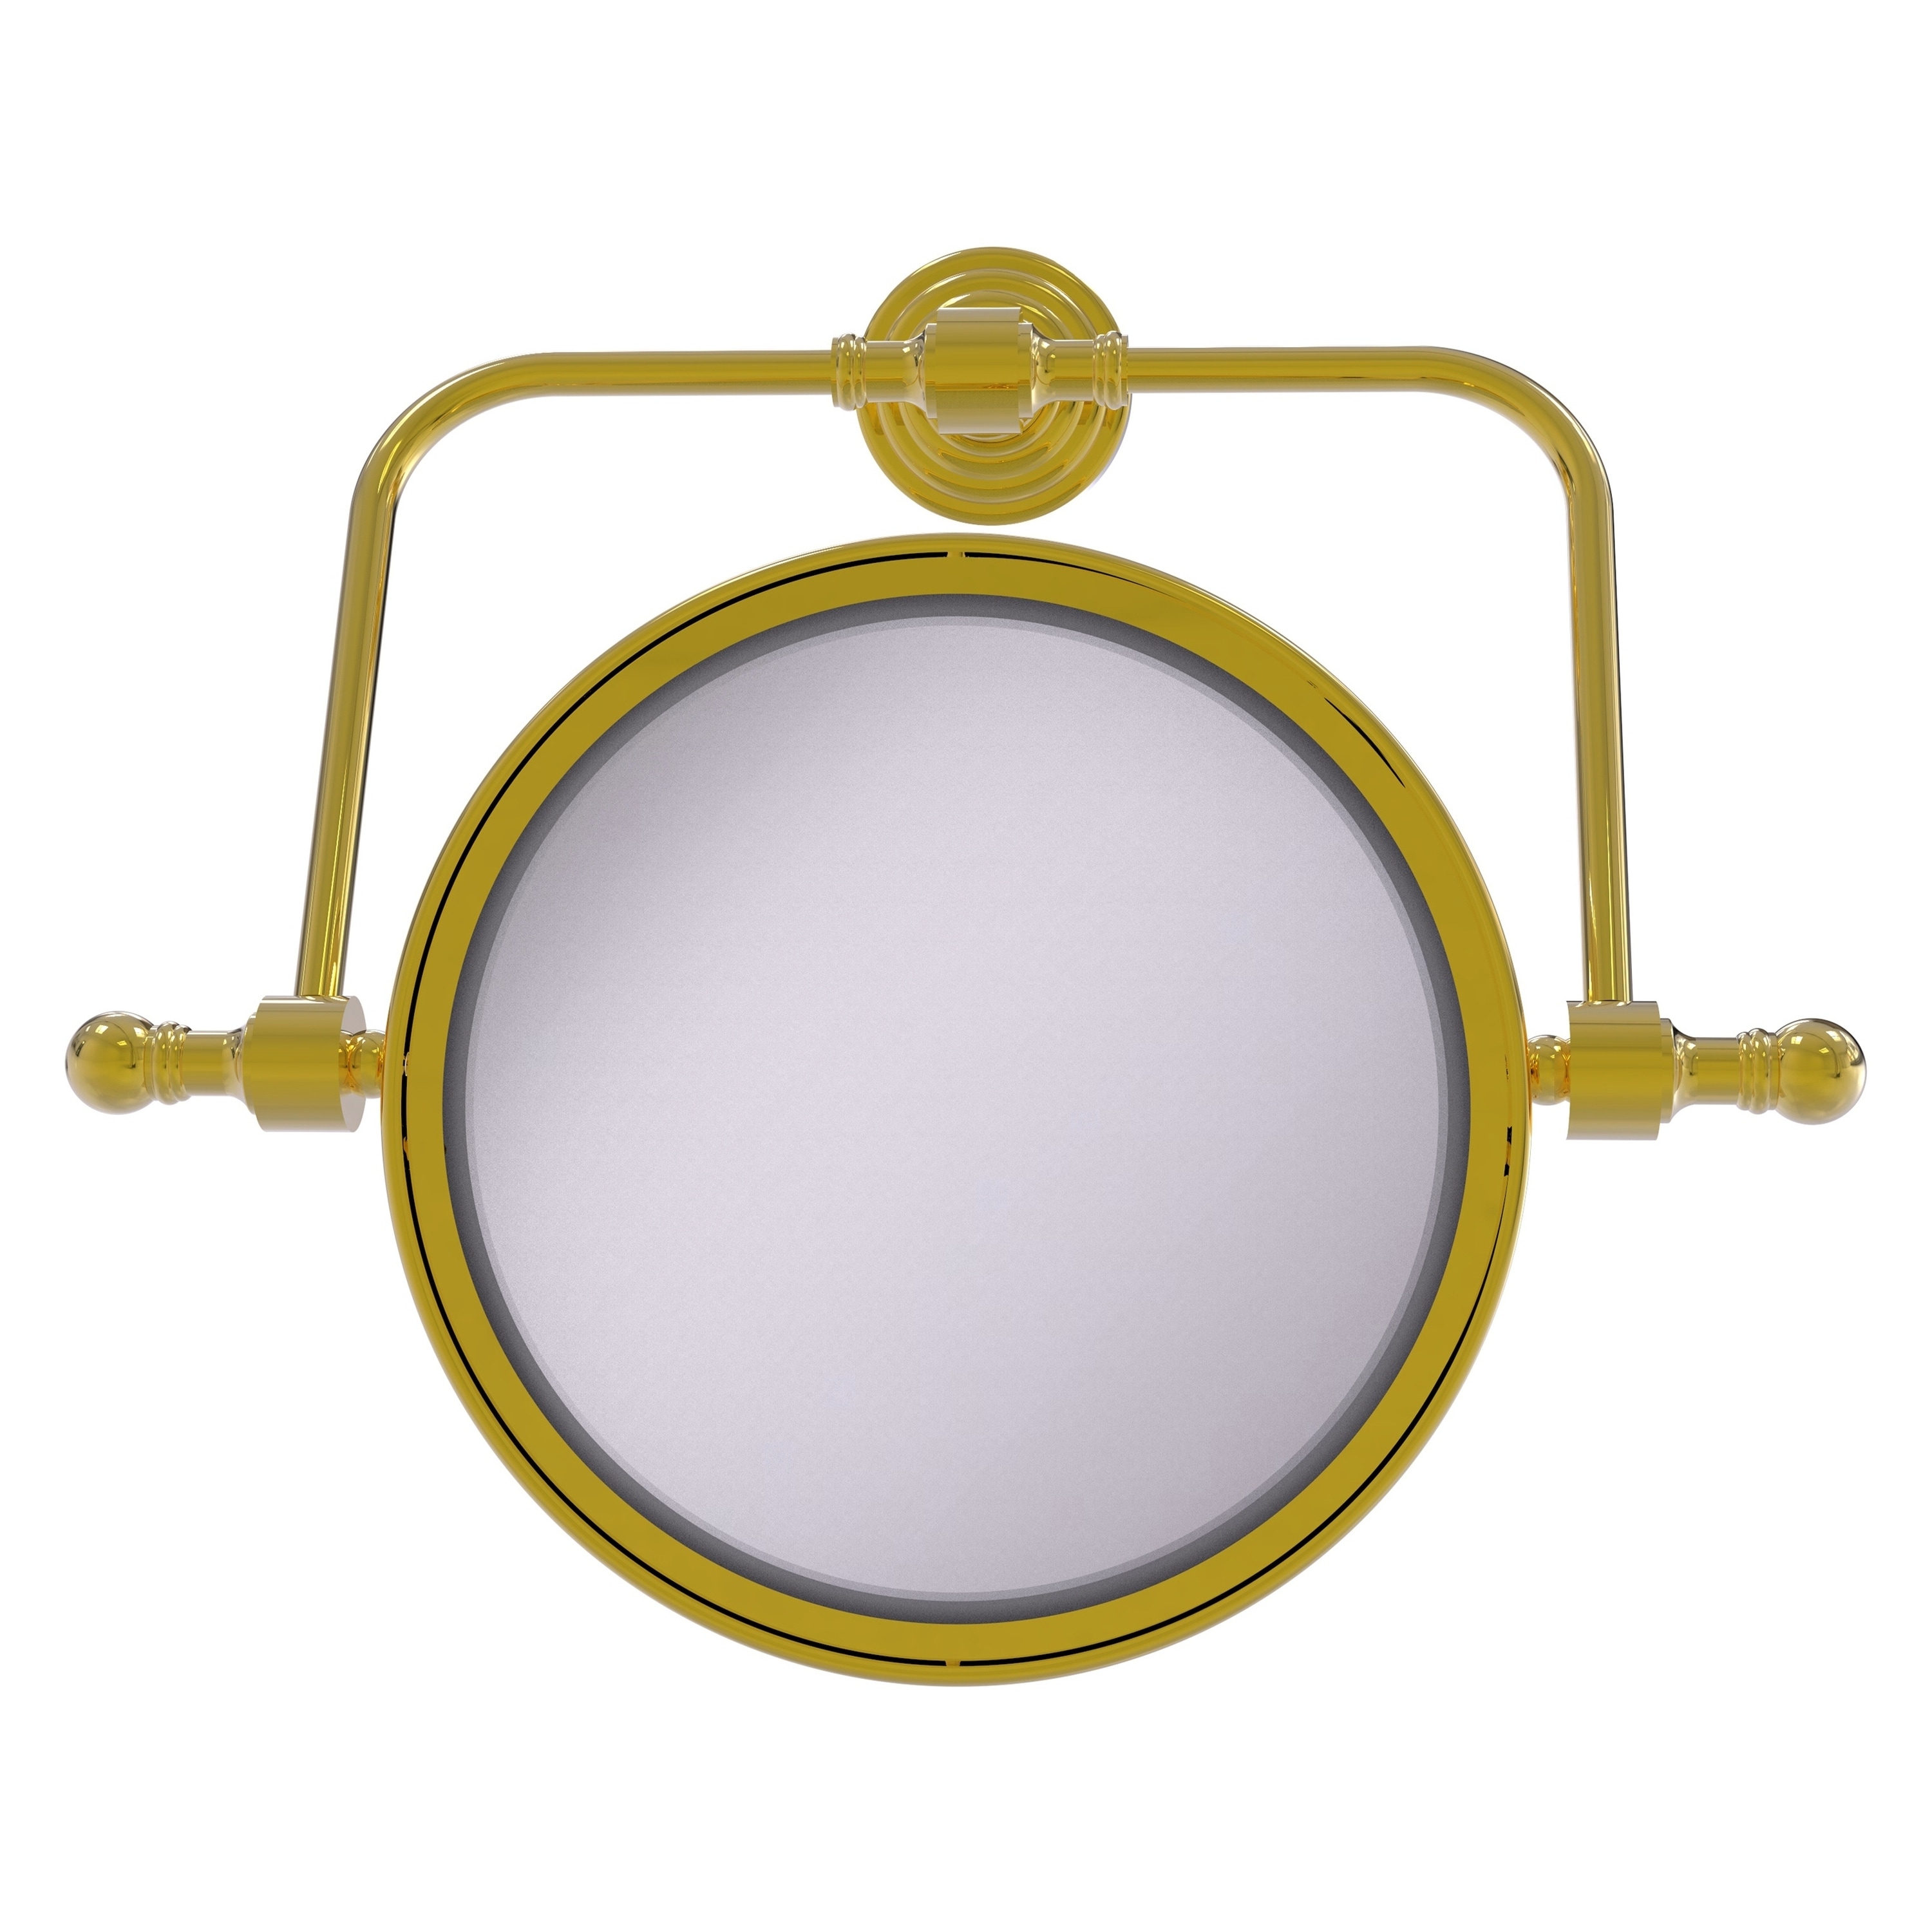 Retro Wave 7-in x 8-in Polished Gold Double-sided 2X Magnifying Wall-mounted Vanity Mirror | - Allied Brass RWM-4/2X-PB